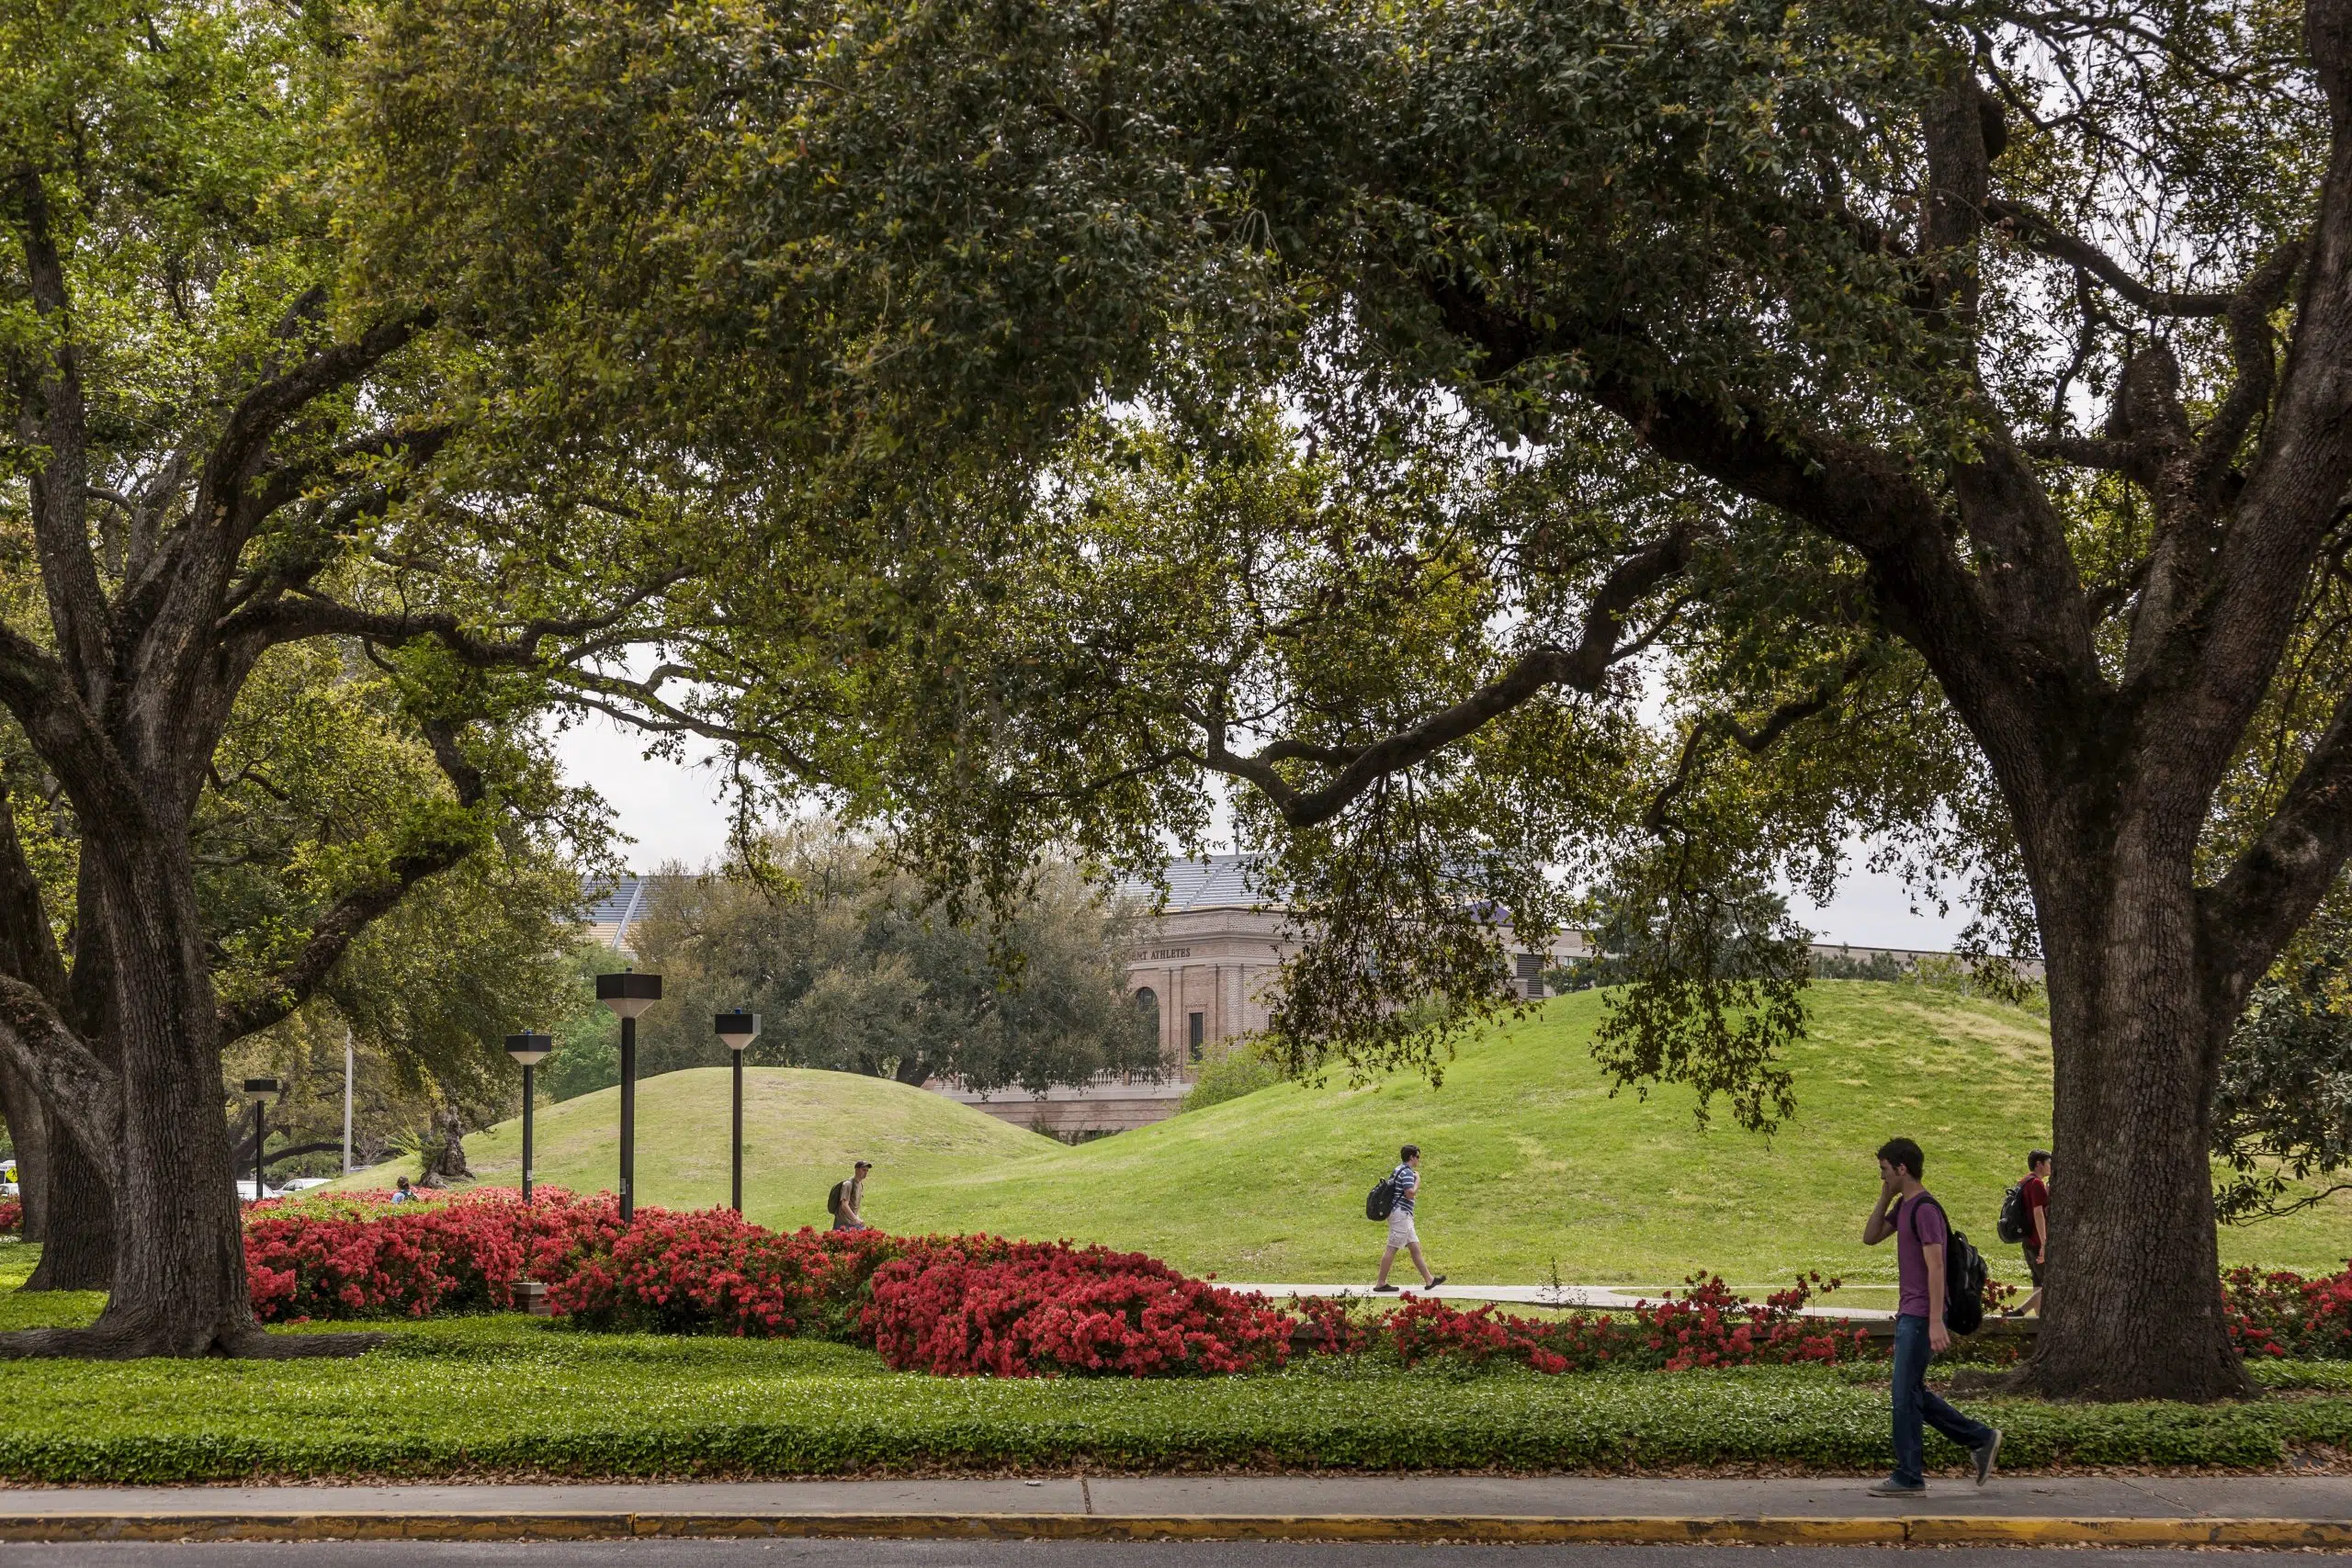 New research shows LSU campus mounds are the oldest known manmade structures in North America